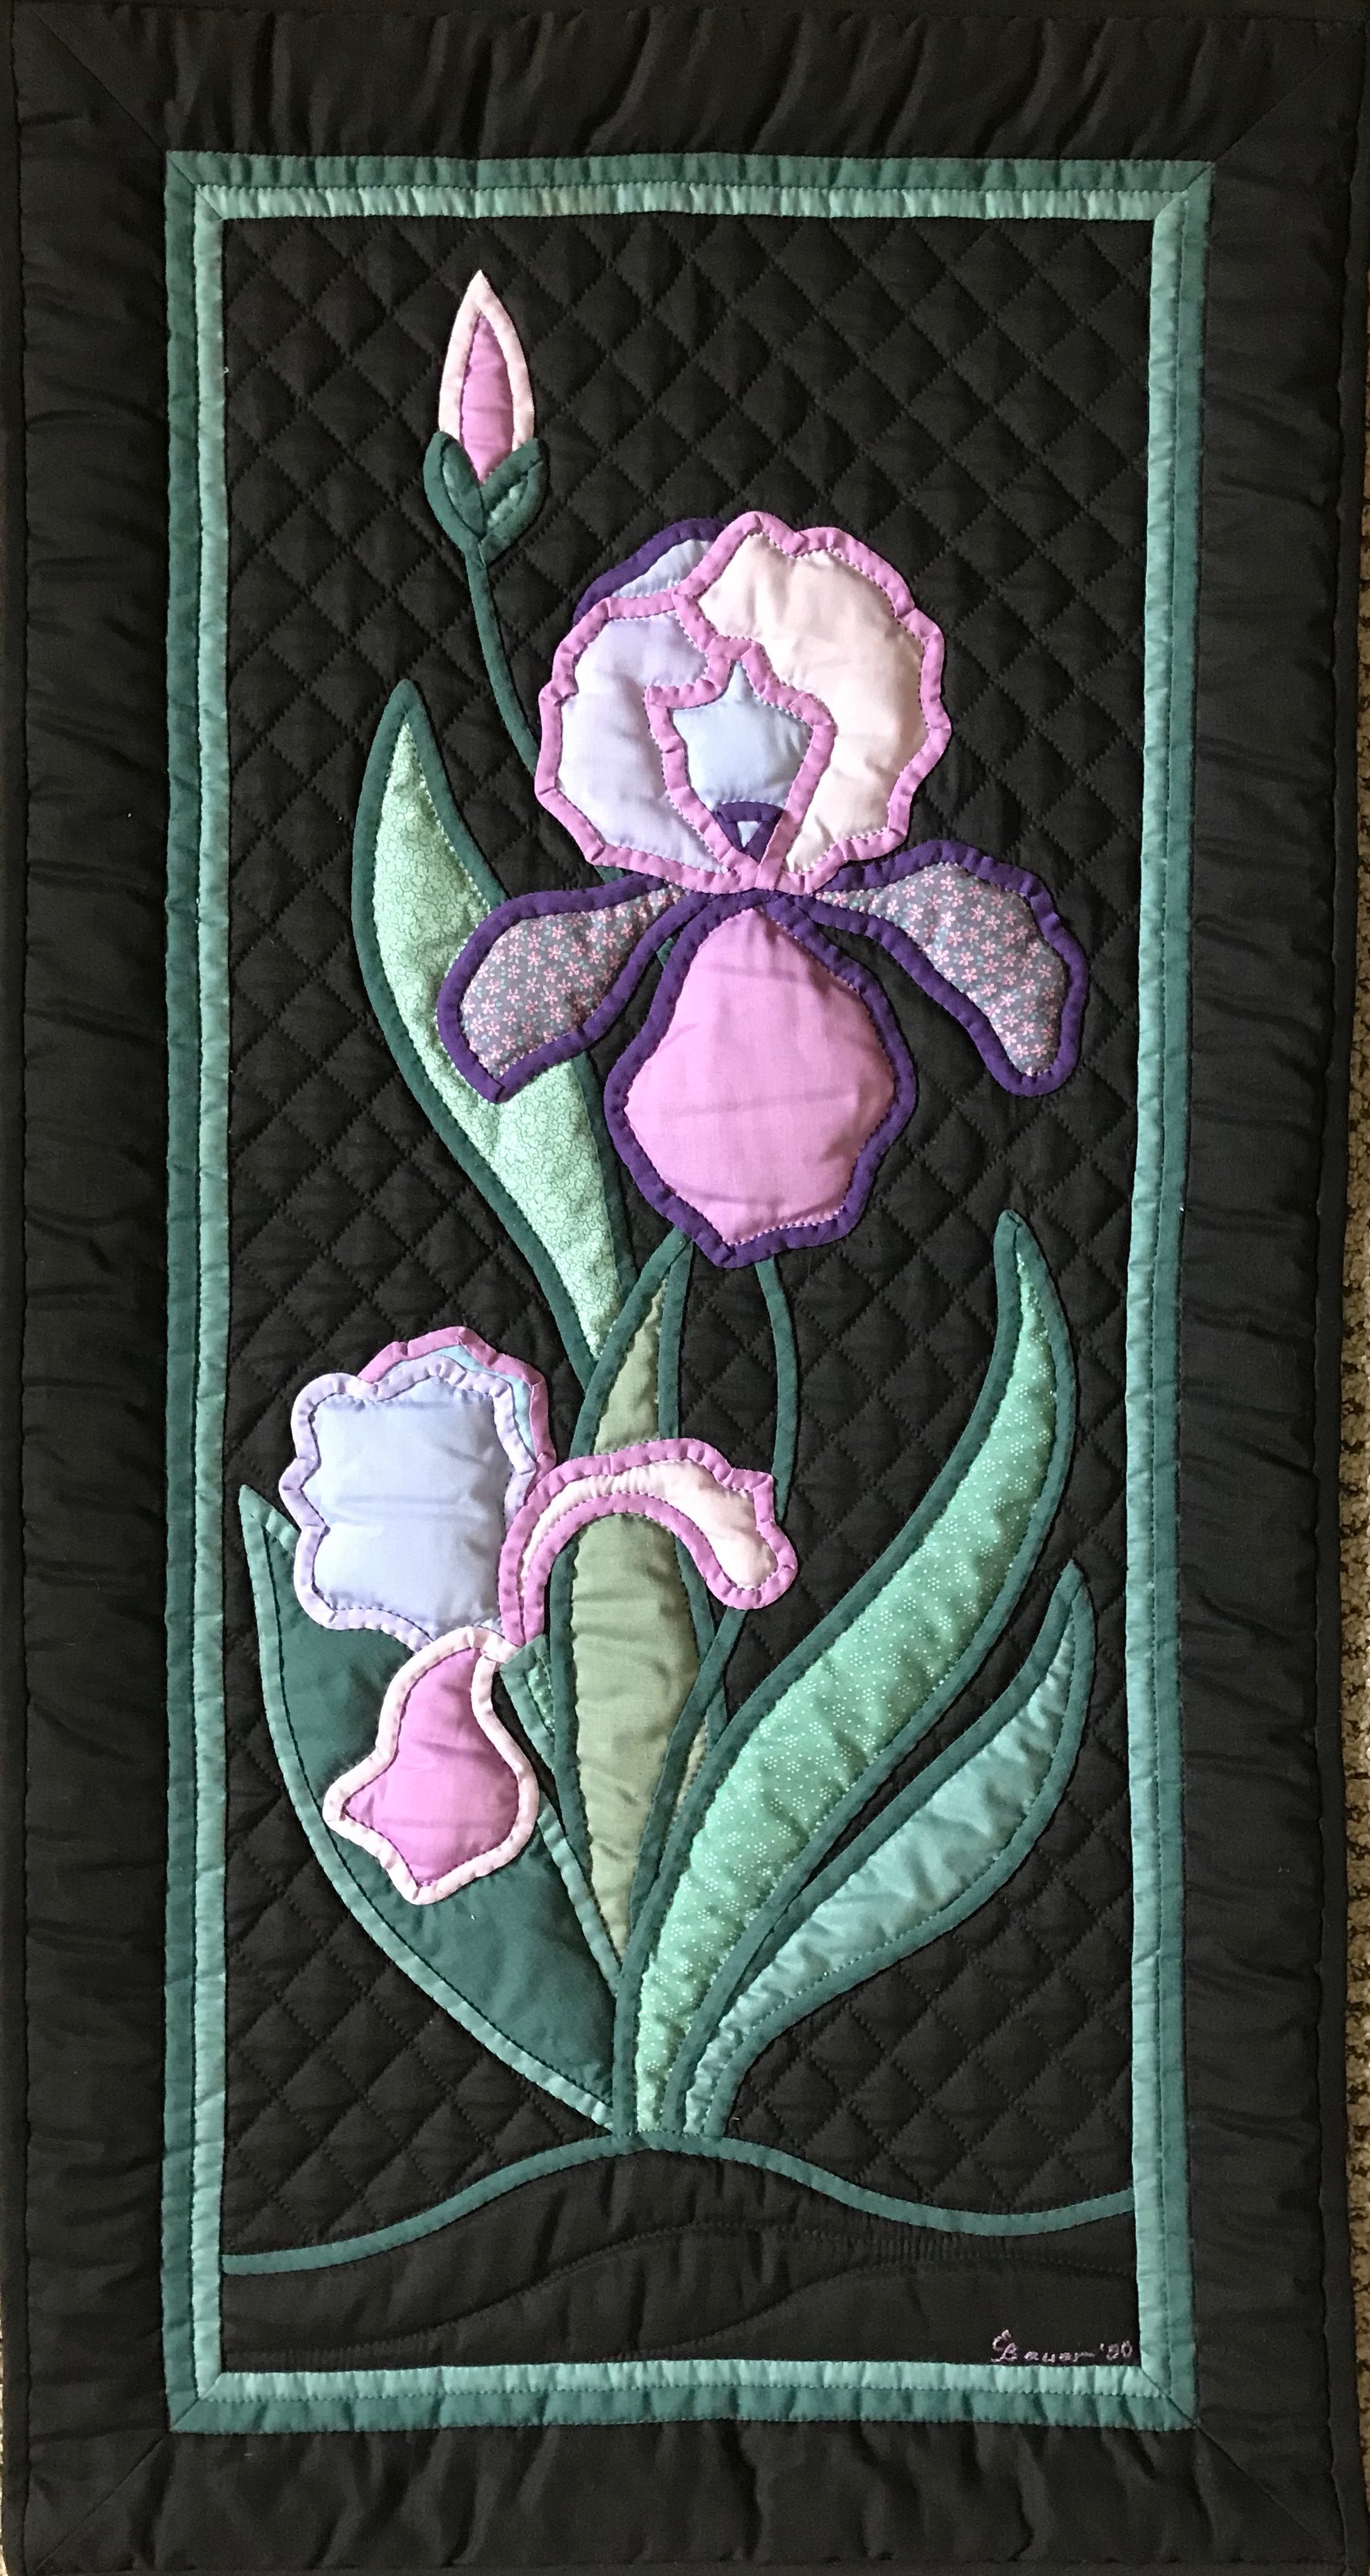 Iris, Pieced, Appliquéd &amp; Hand Quilted by Evelyn Bauer, donated by Steve McClain,17 x 32”